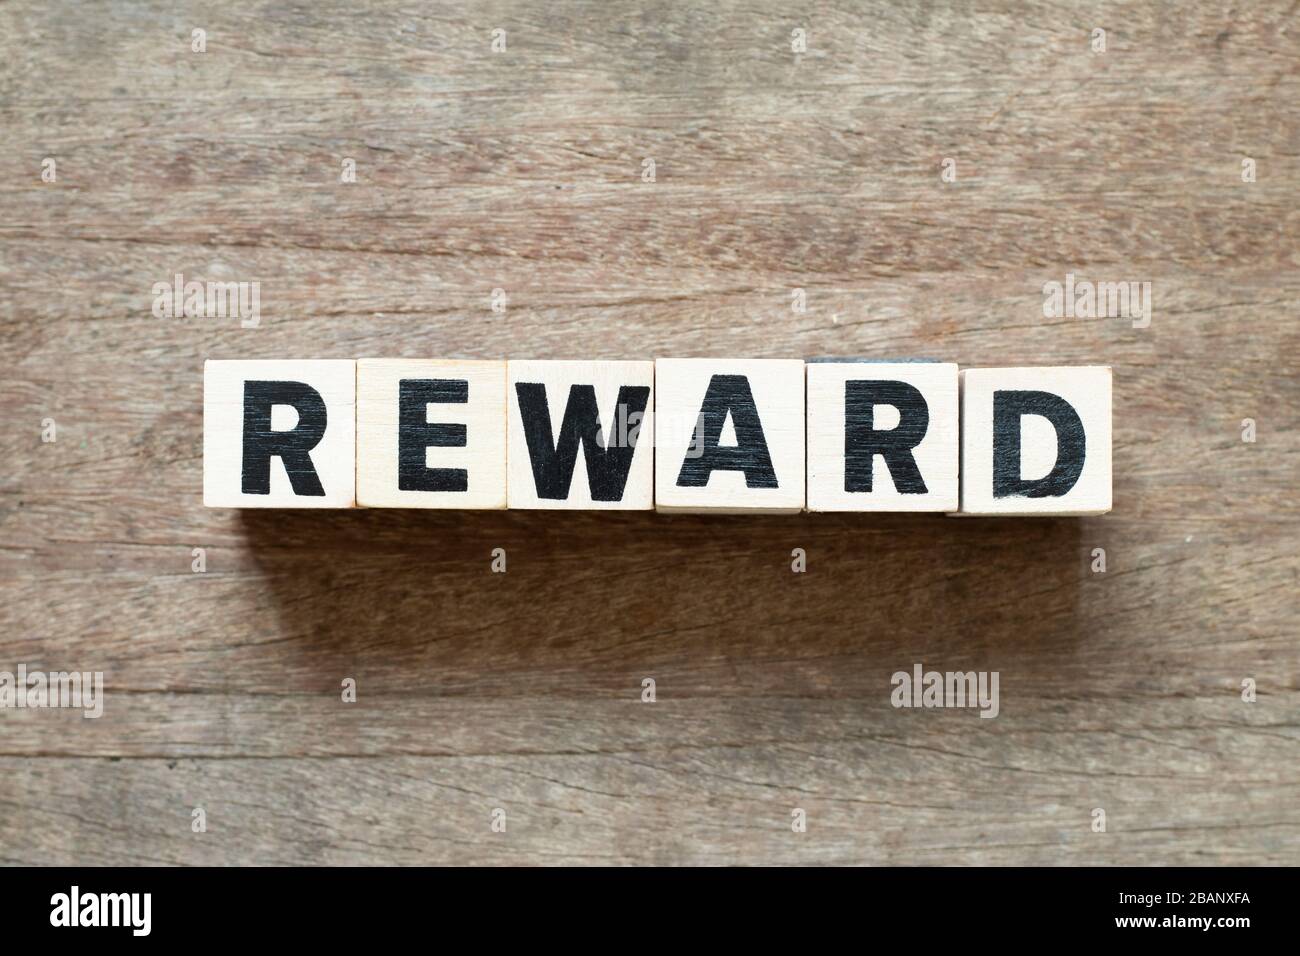 Letter block in word reward on wood background Stock Photo